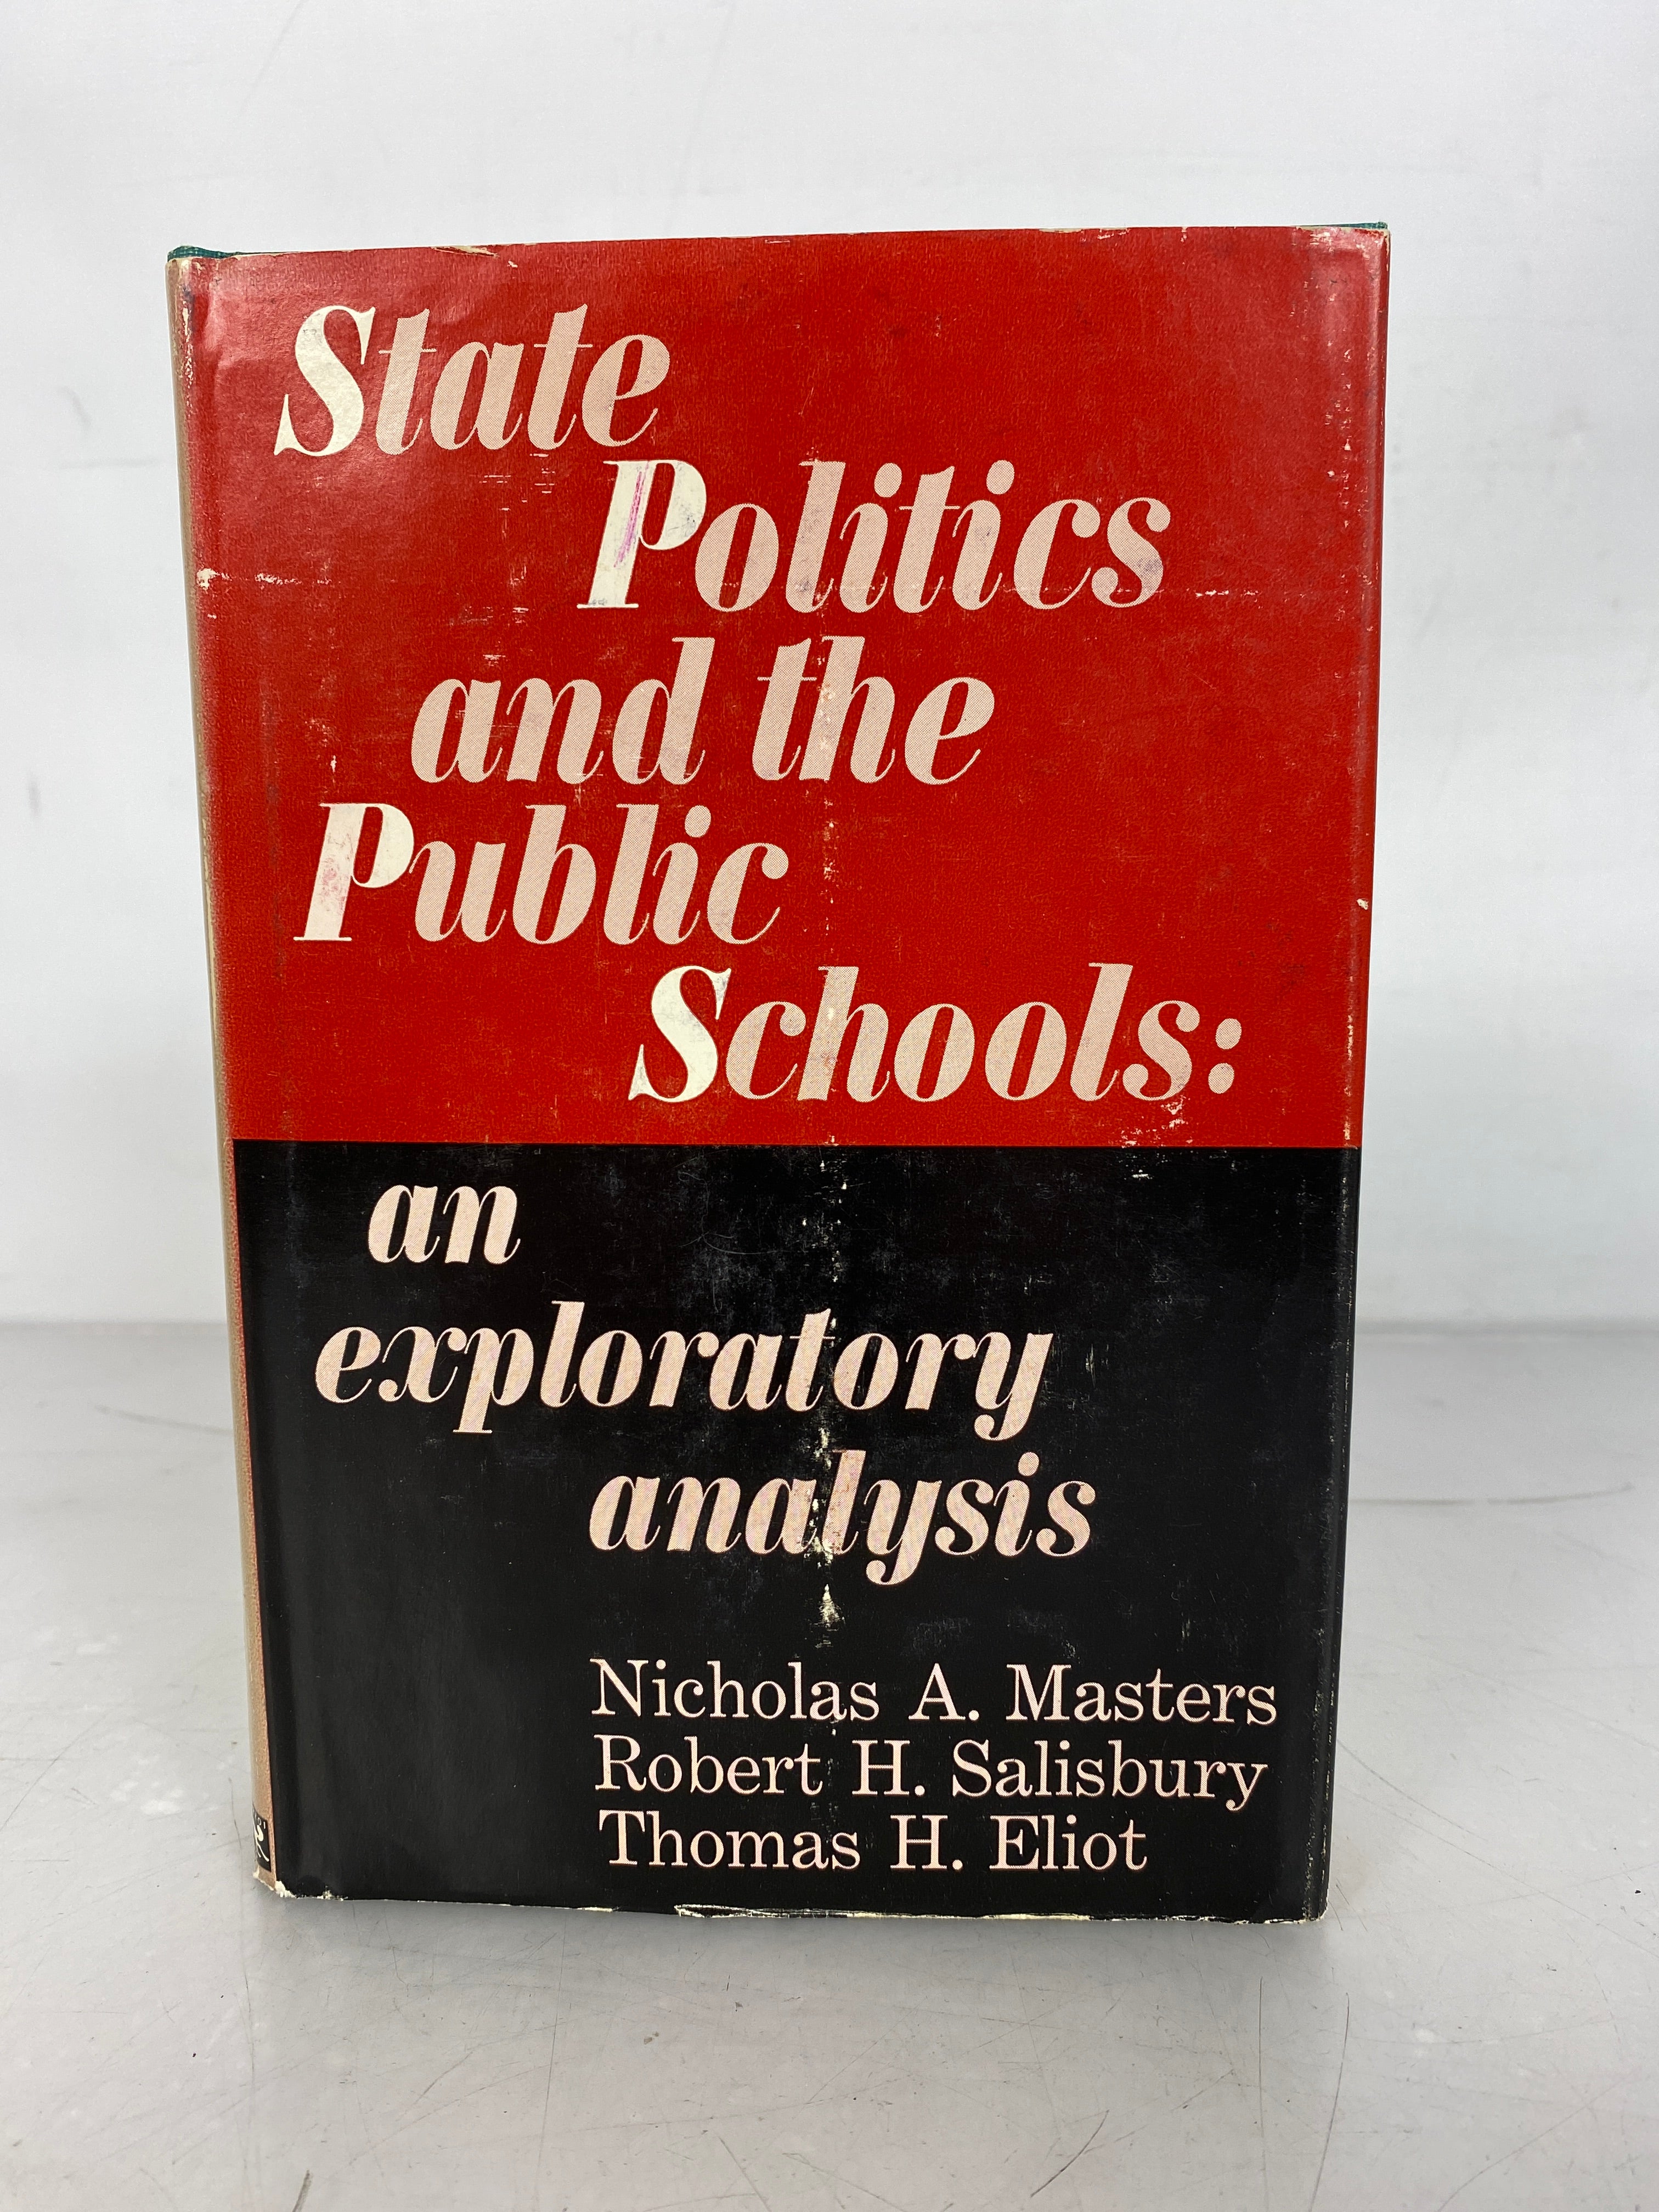 State Politics and the Public Schools by Masters, Salisbury, and Eliot 1964 HC